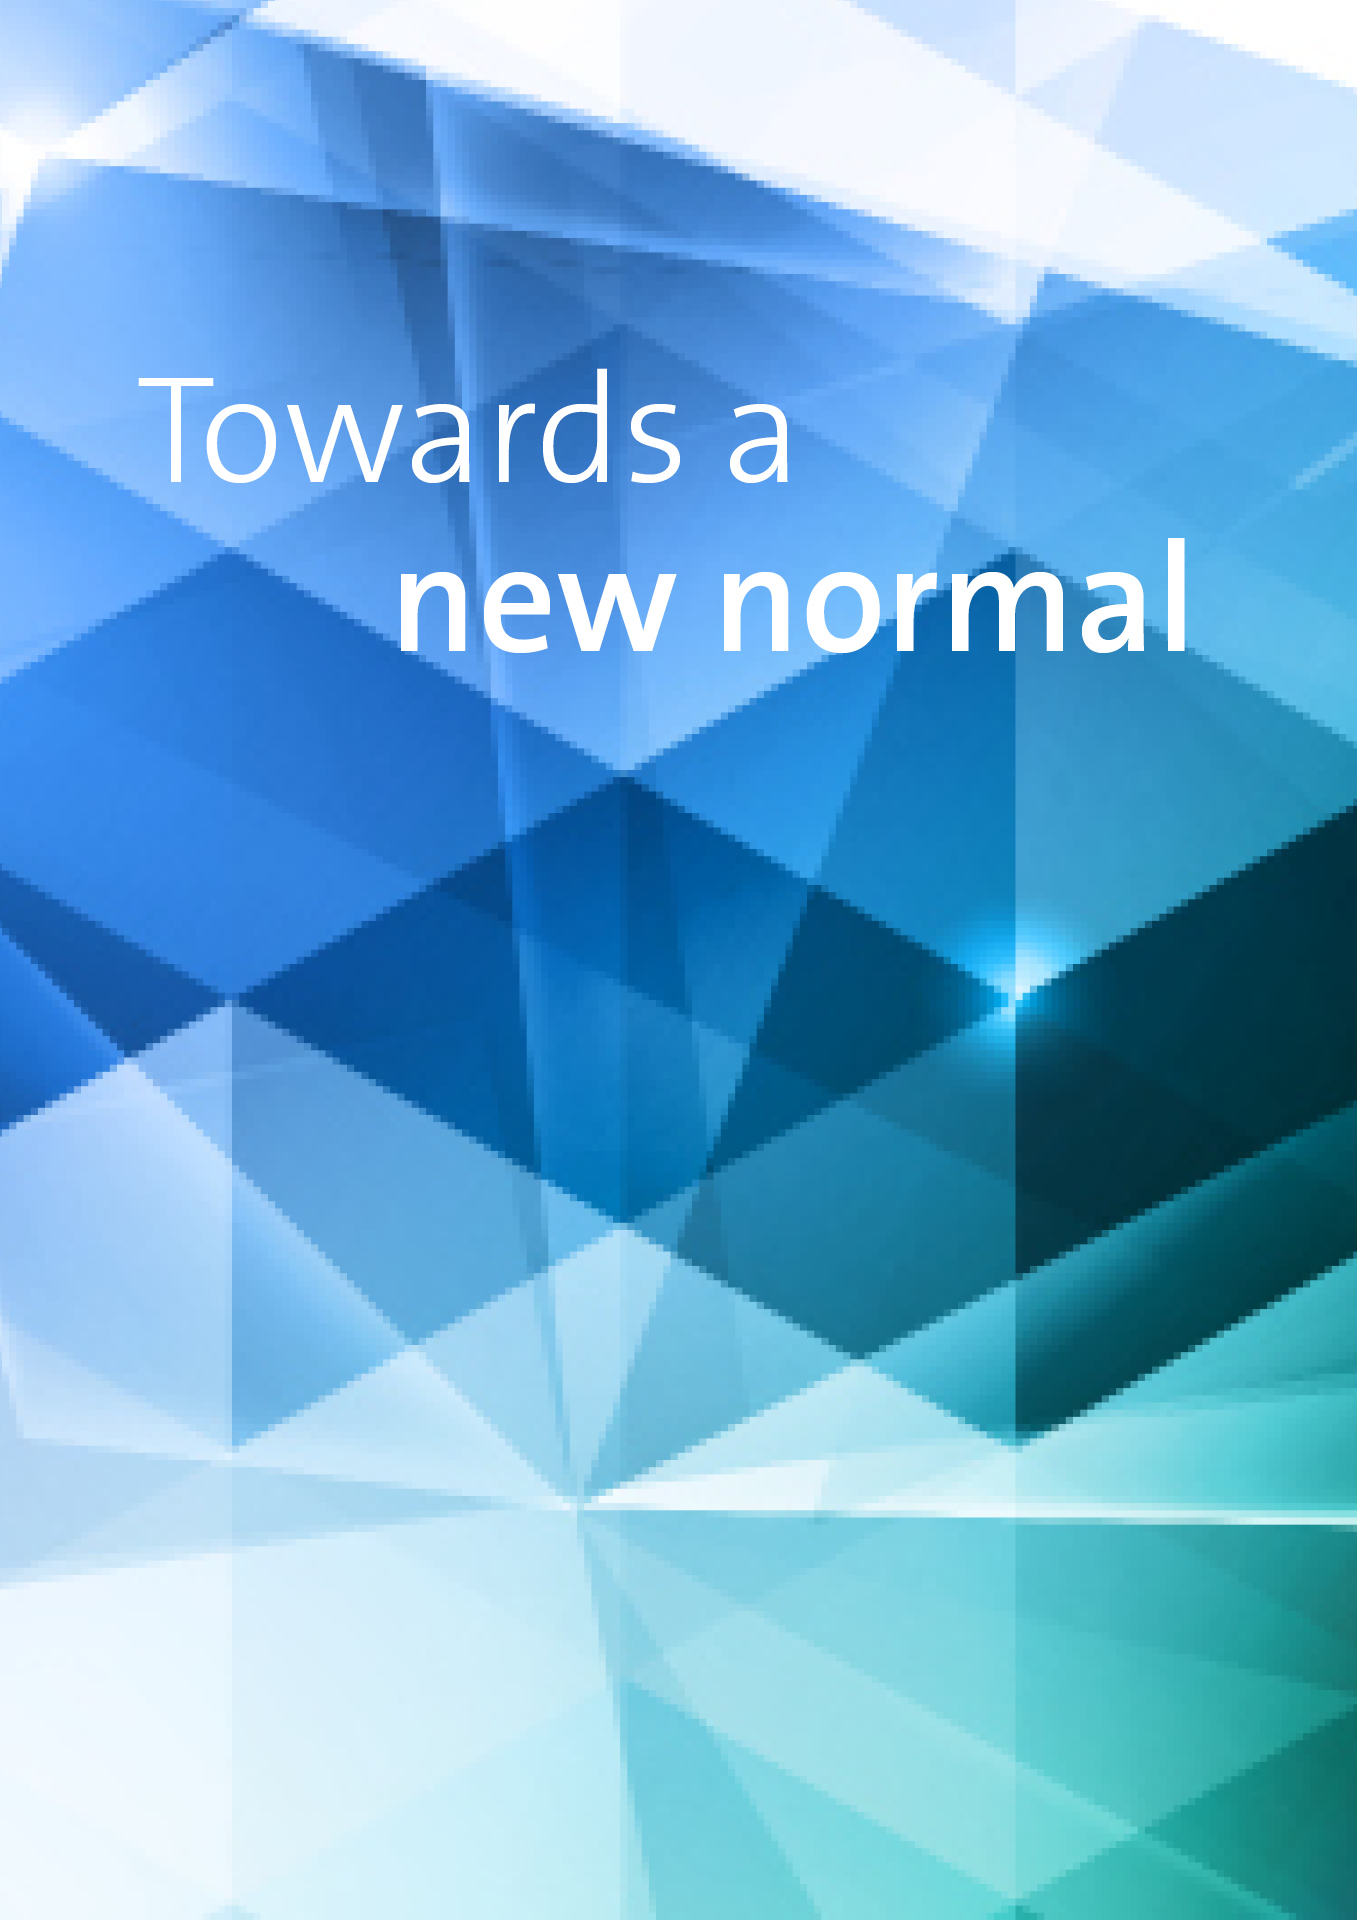 Geometric shapes in tones of blue and green with text "towards the new normal" 